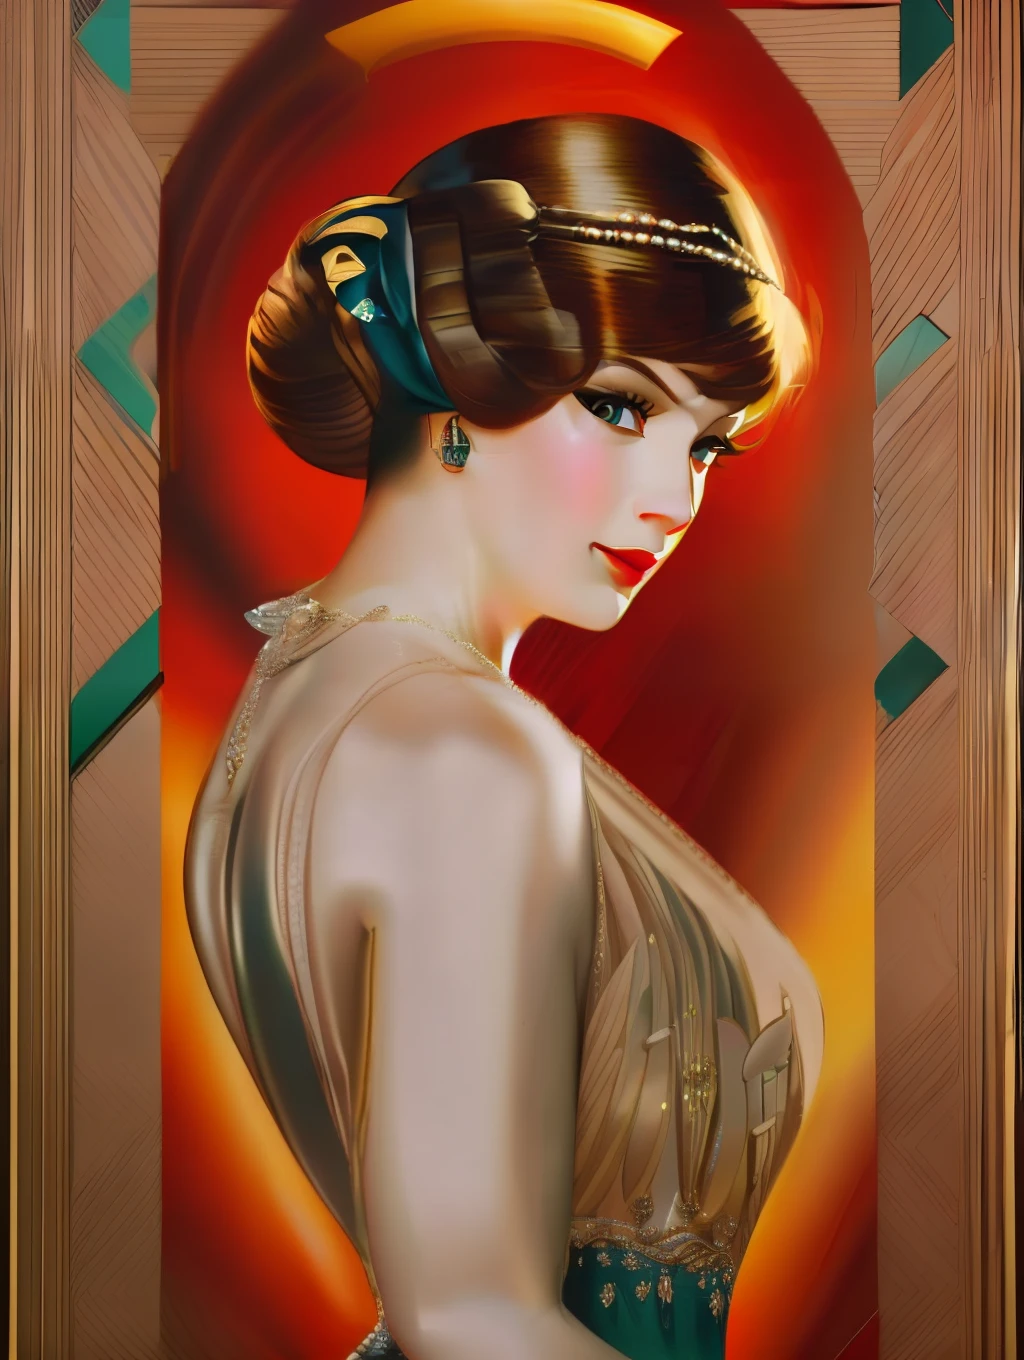 (Masterpiece) portrait of an Insanely gorgeous art-deco sophisticated lady, hyperdetailed, in the style of Ted Withers and Alberto Vargas